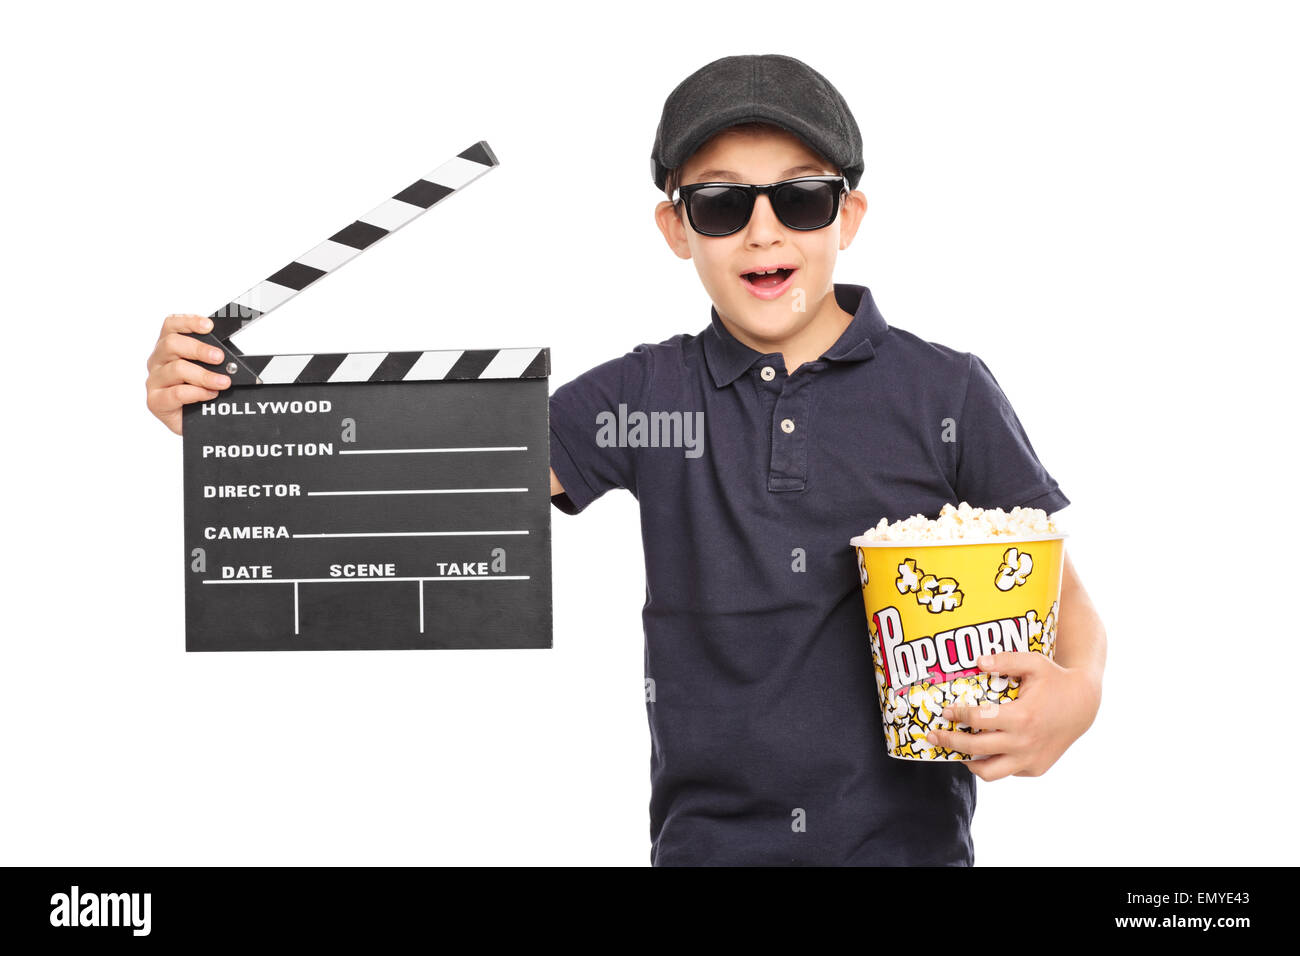 Little kid with a beret and sunglasses holding a box of popcorn and a movie clapperboard isolated on white background Stock Photo